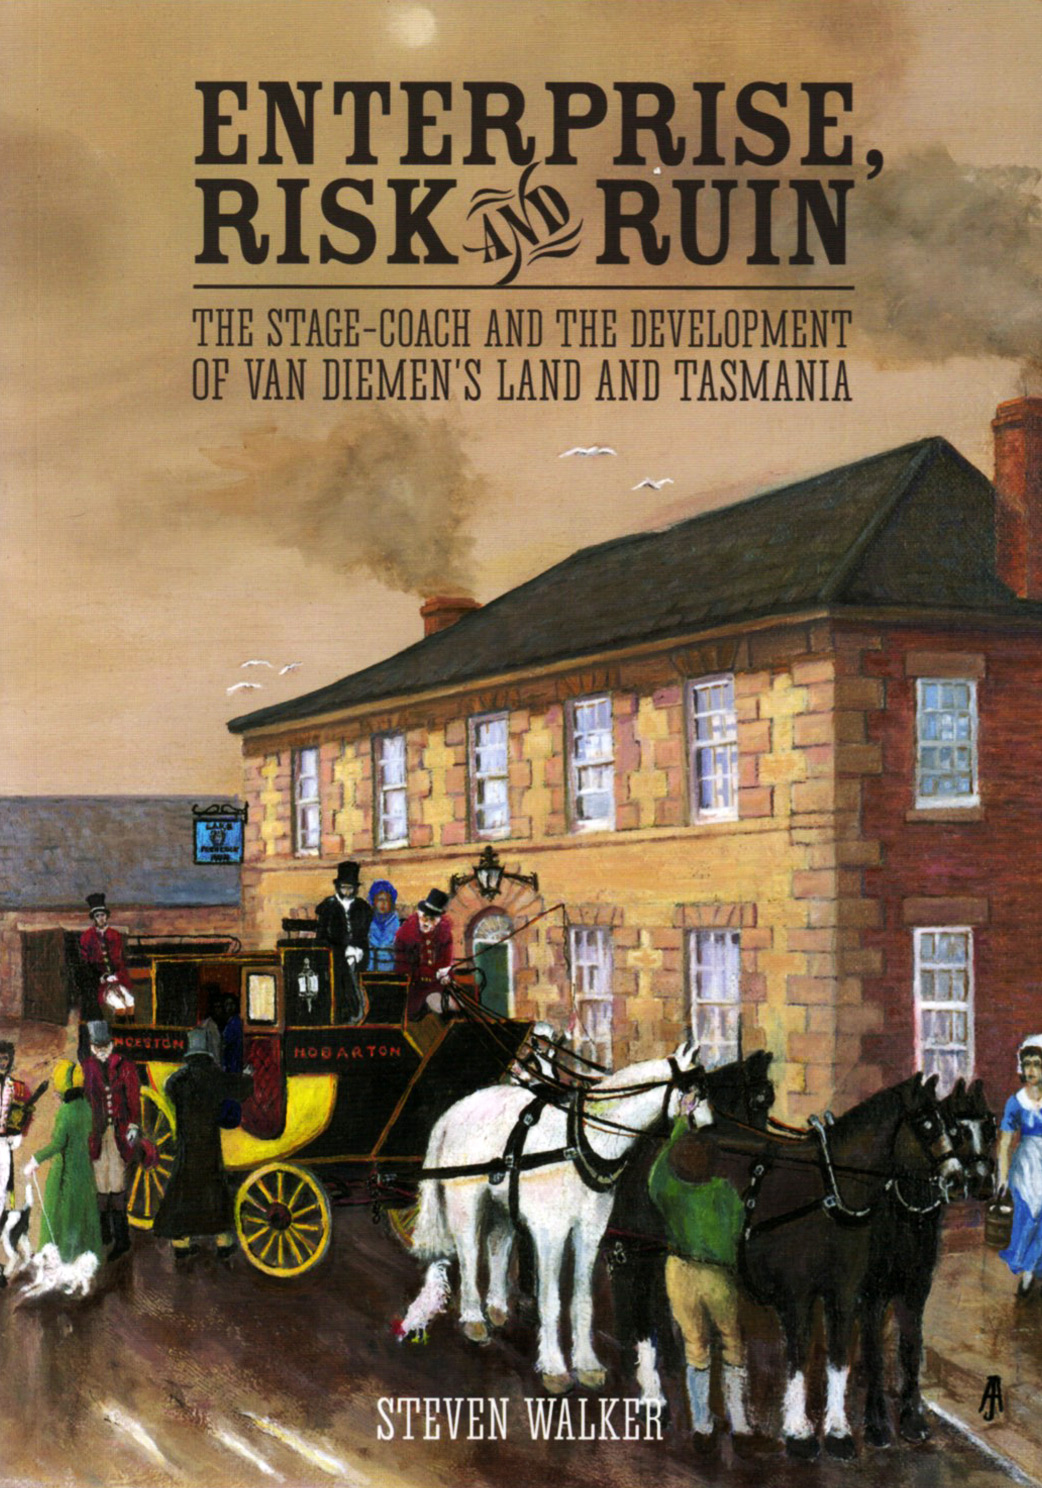 Enterprise, Risk and Ruin - the Stagecoach and the Development of Van Diemen's Land and Tasmania